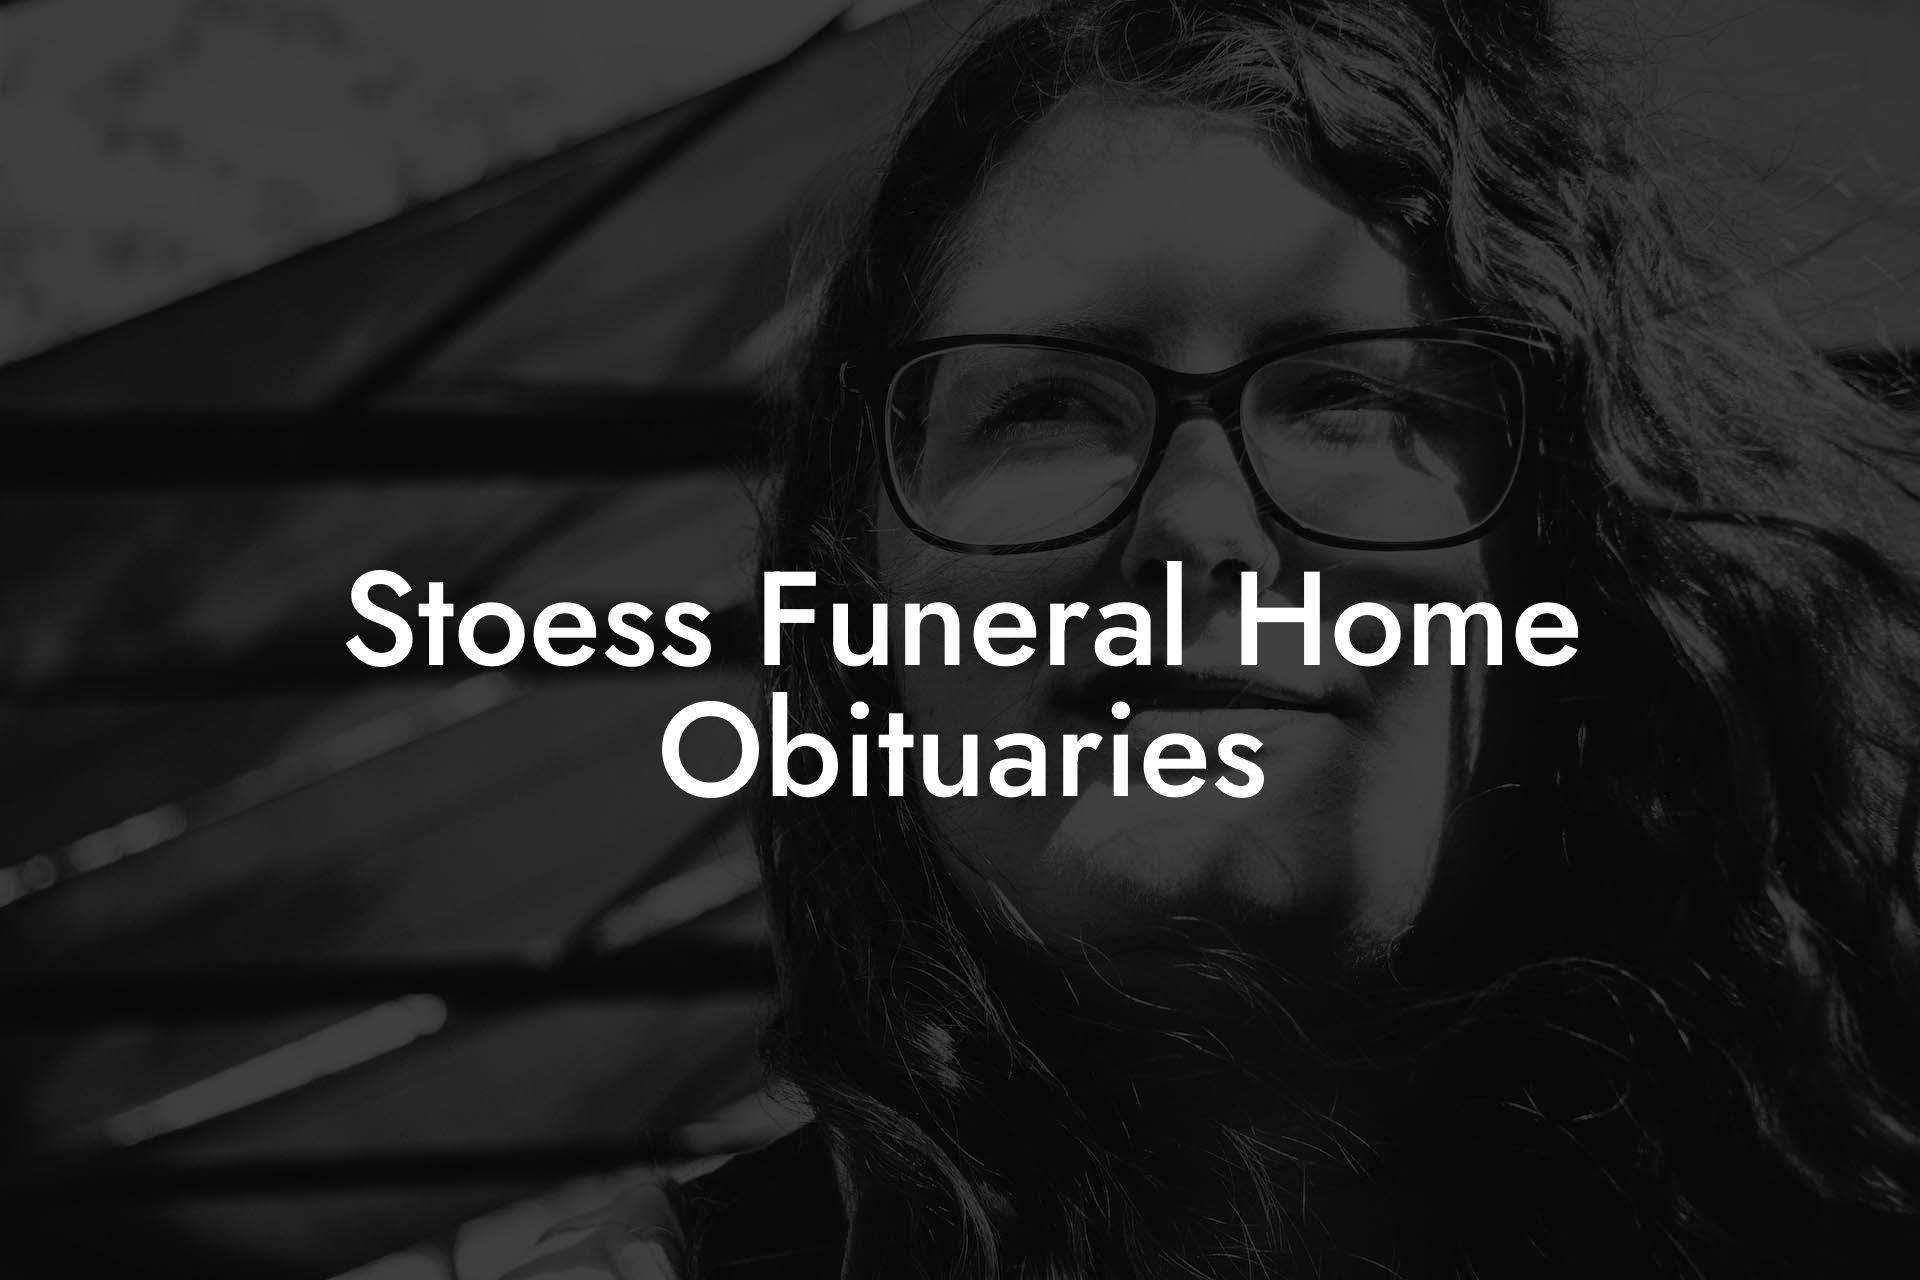 Stoess Funeral Home Obituaries